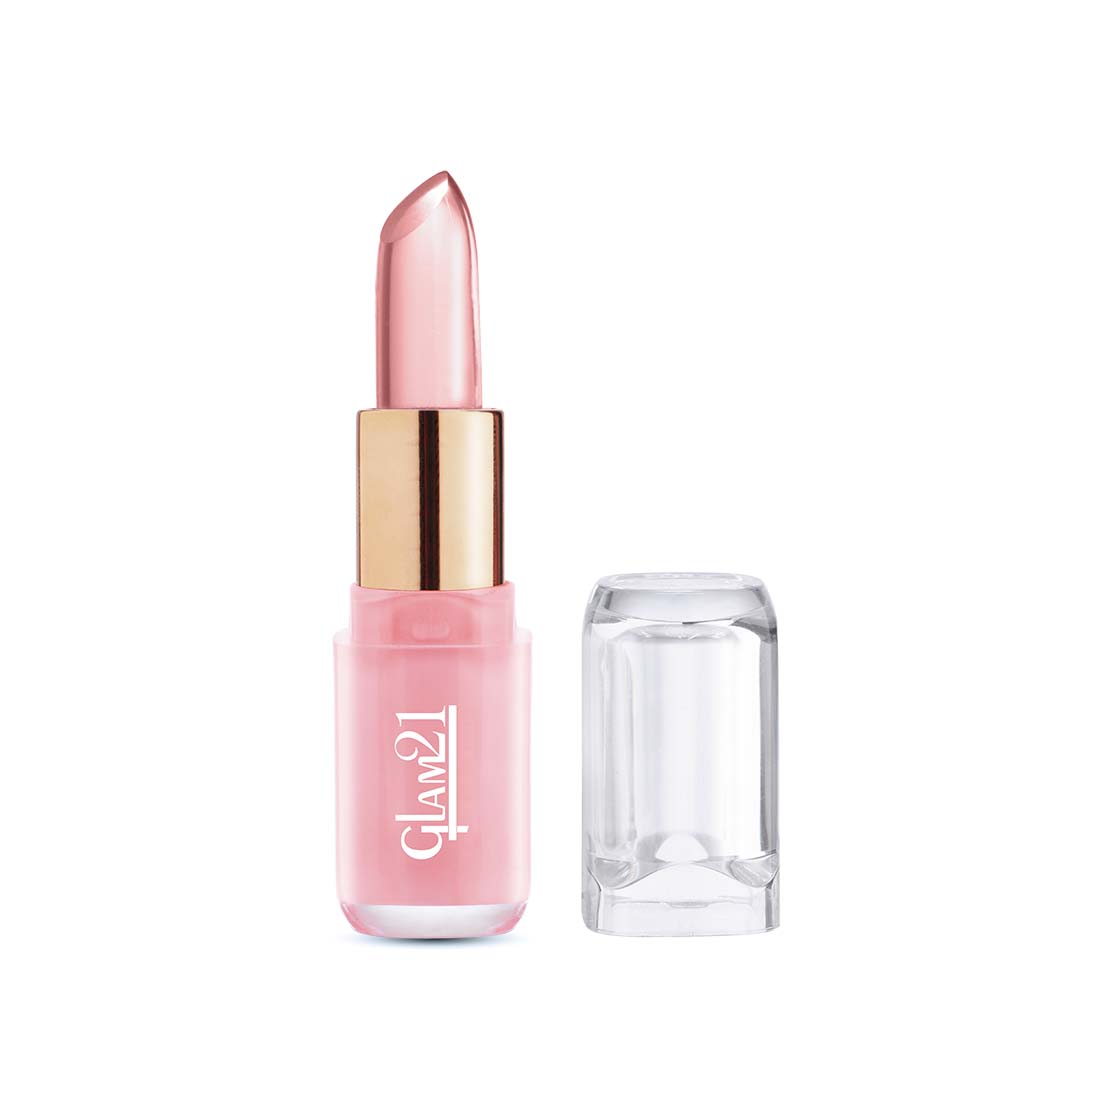 Glam21 Jelly Pop Color Change Fruity Gel Lipstick Soft Lips | Waterproof Glossy Finish, 3.5g (Cranberry Pink)